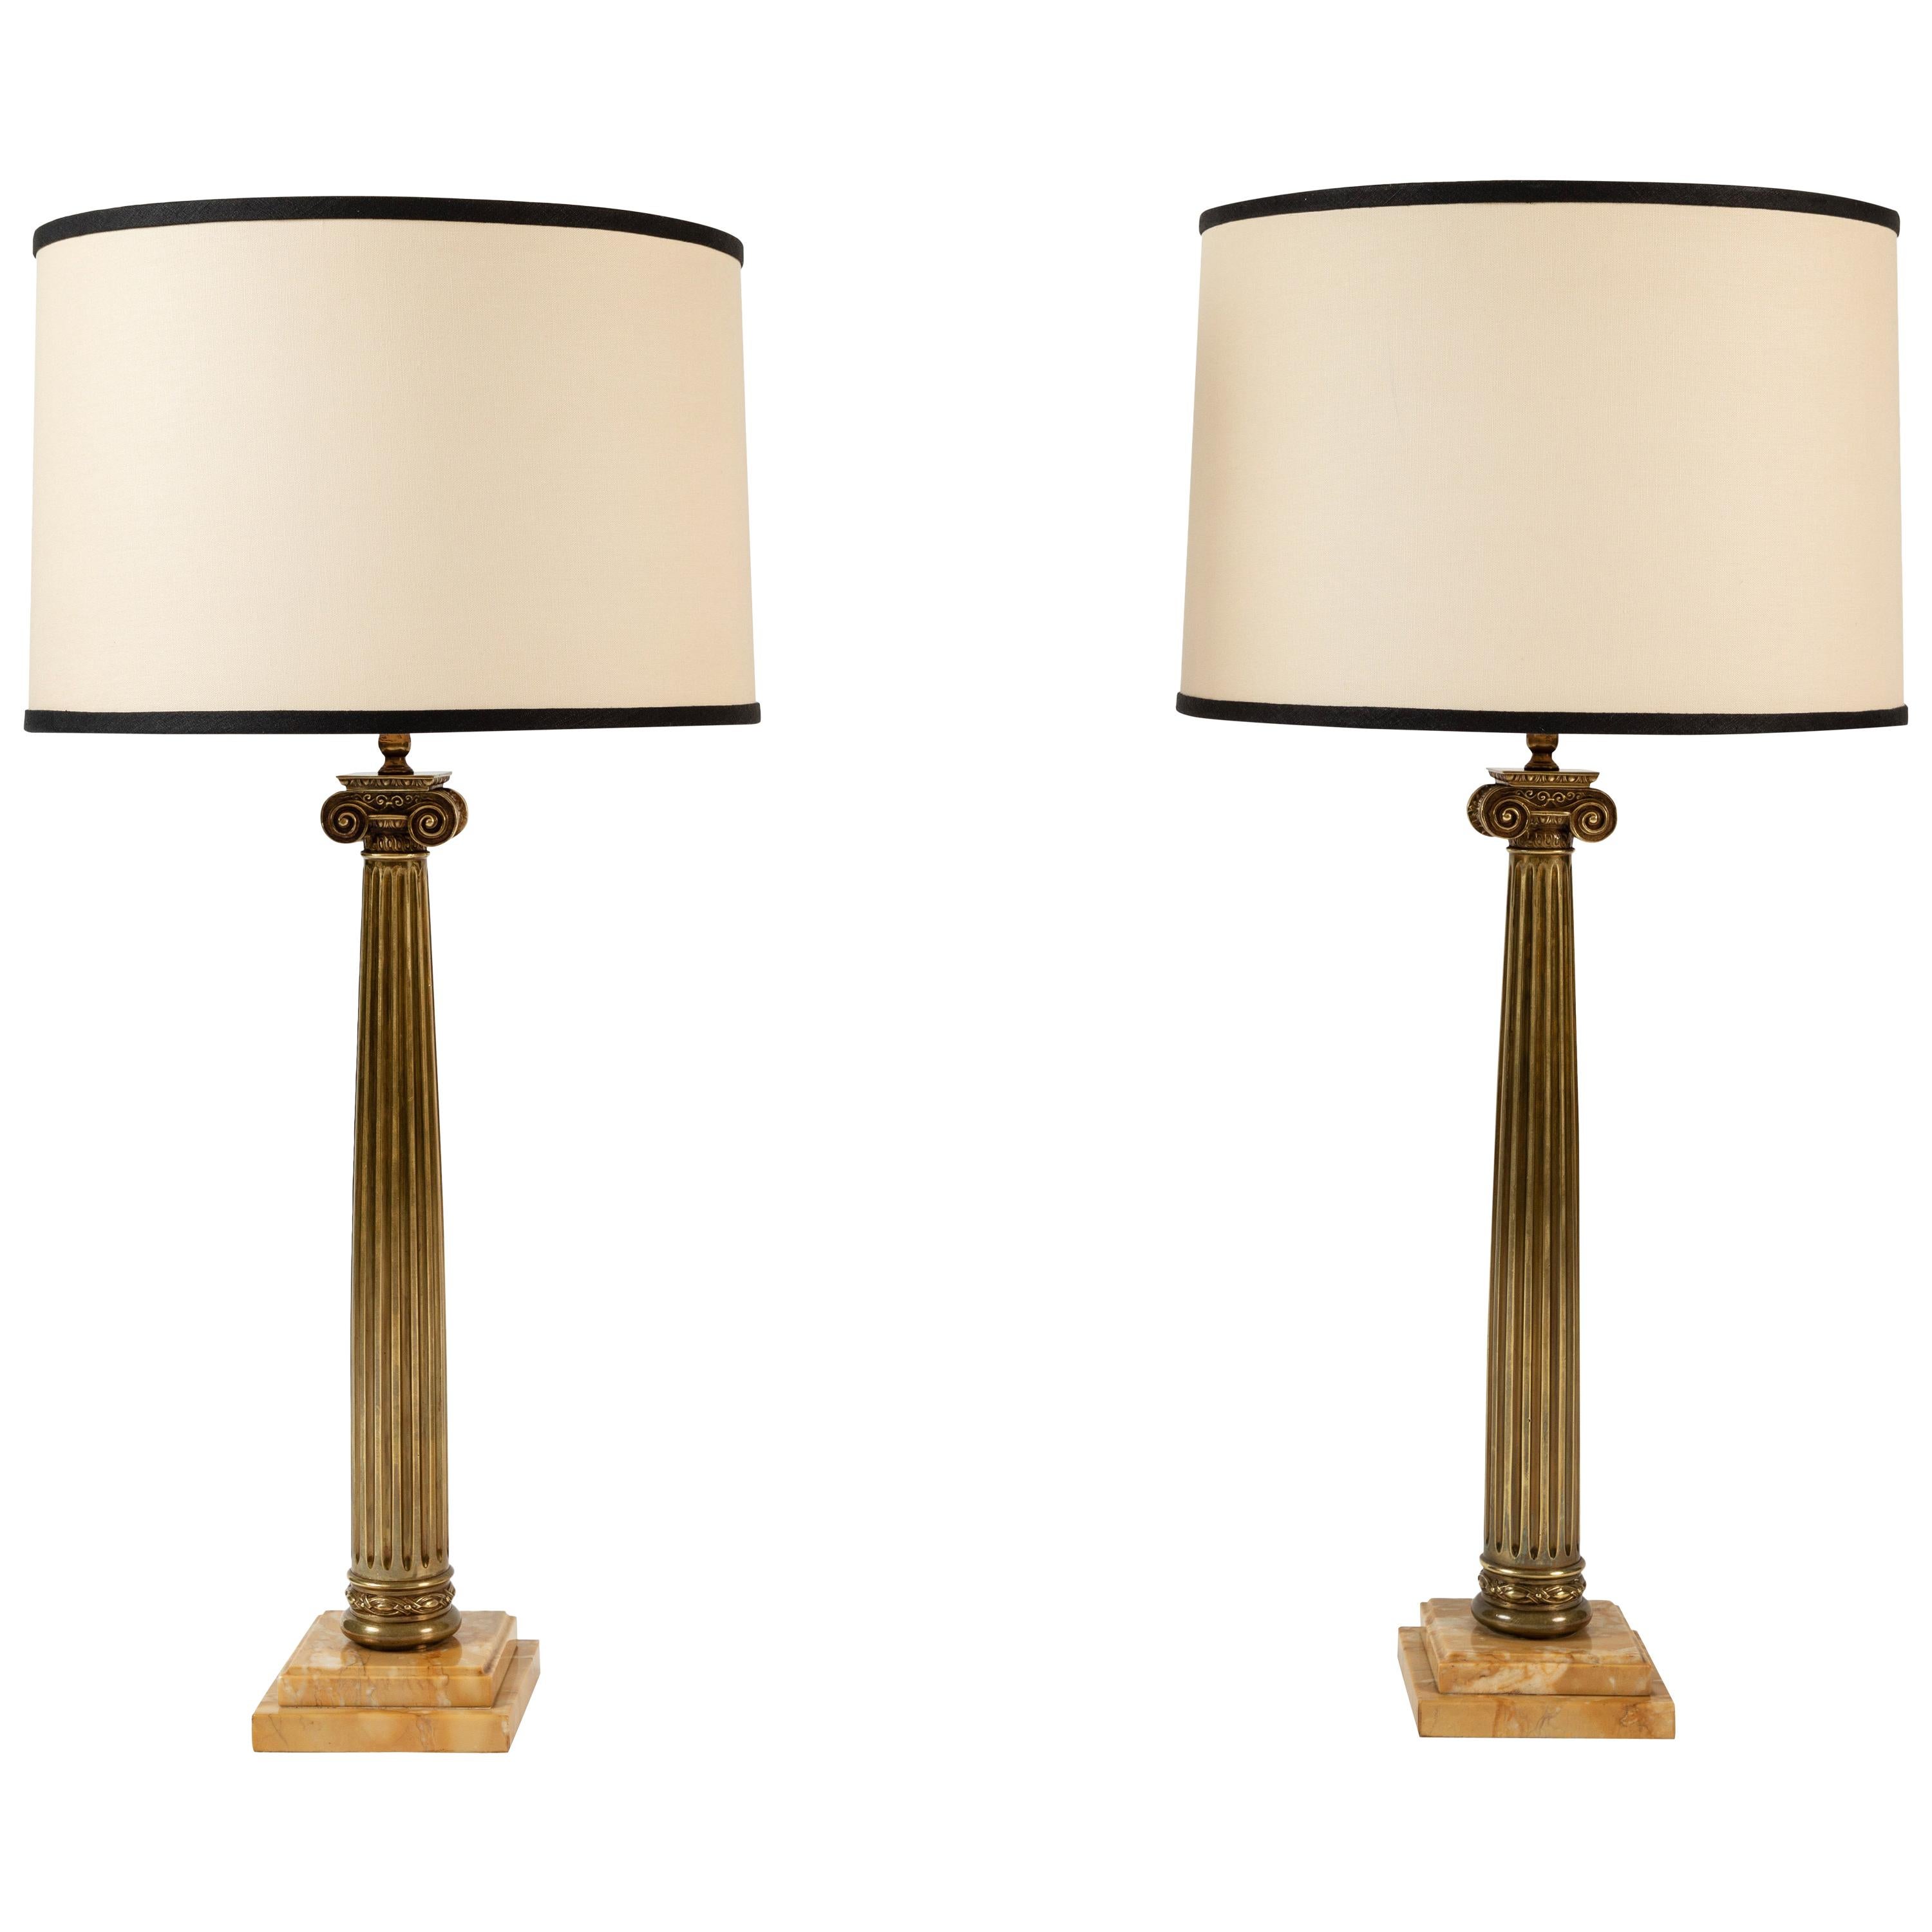 Pair of Patinated Brass Roman Column Table Lamps on Marble Bases